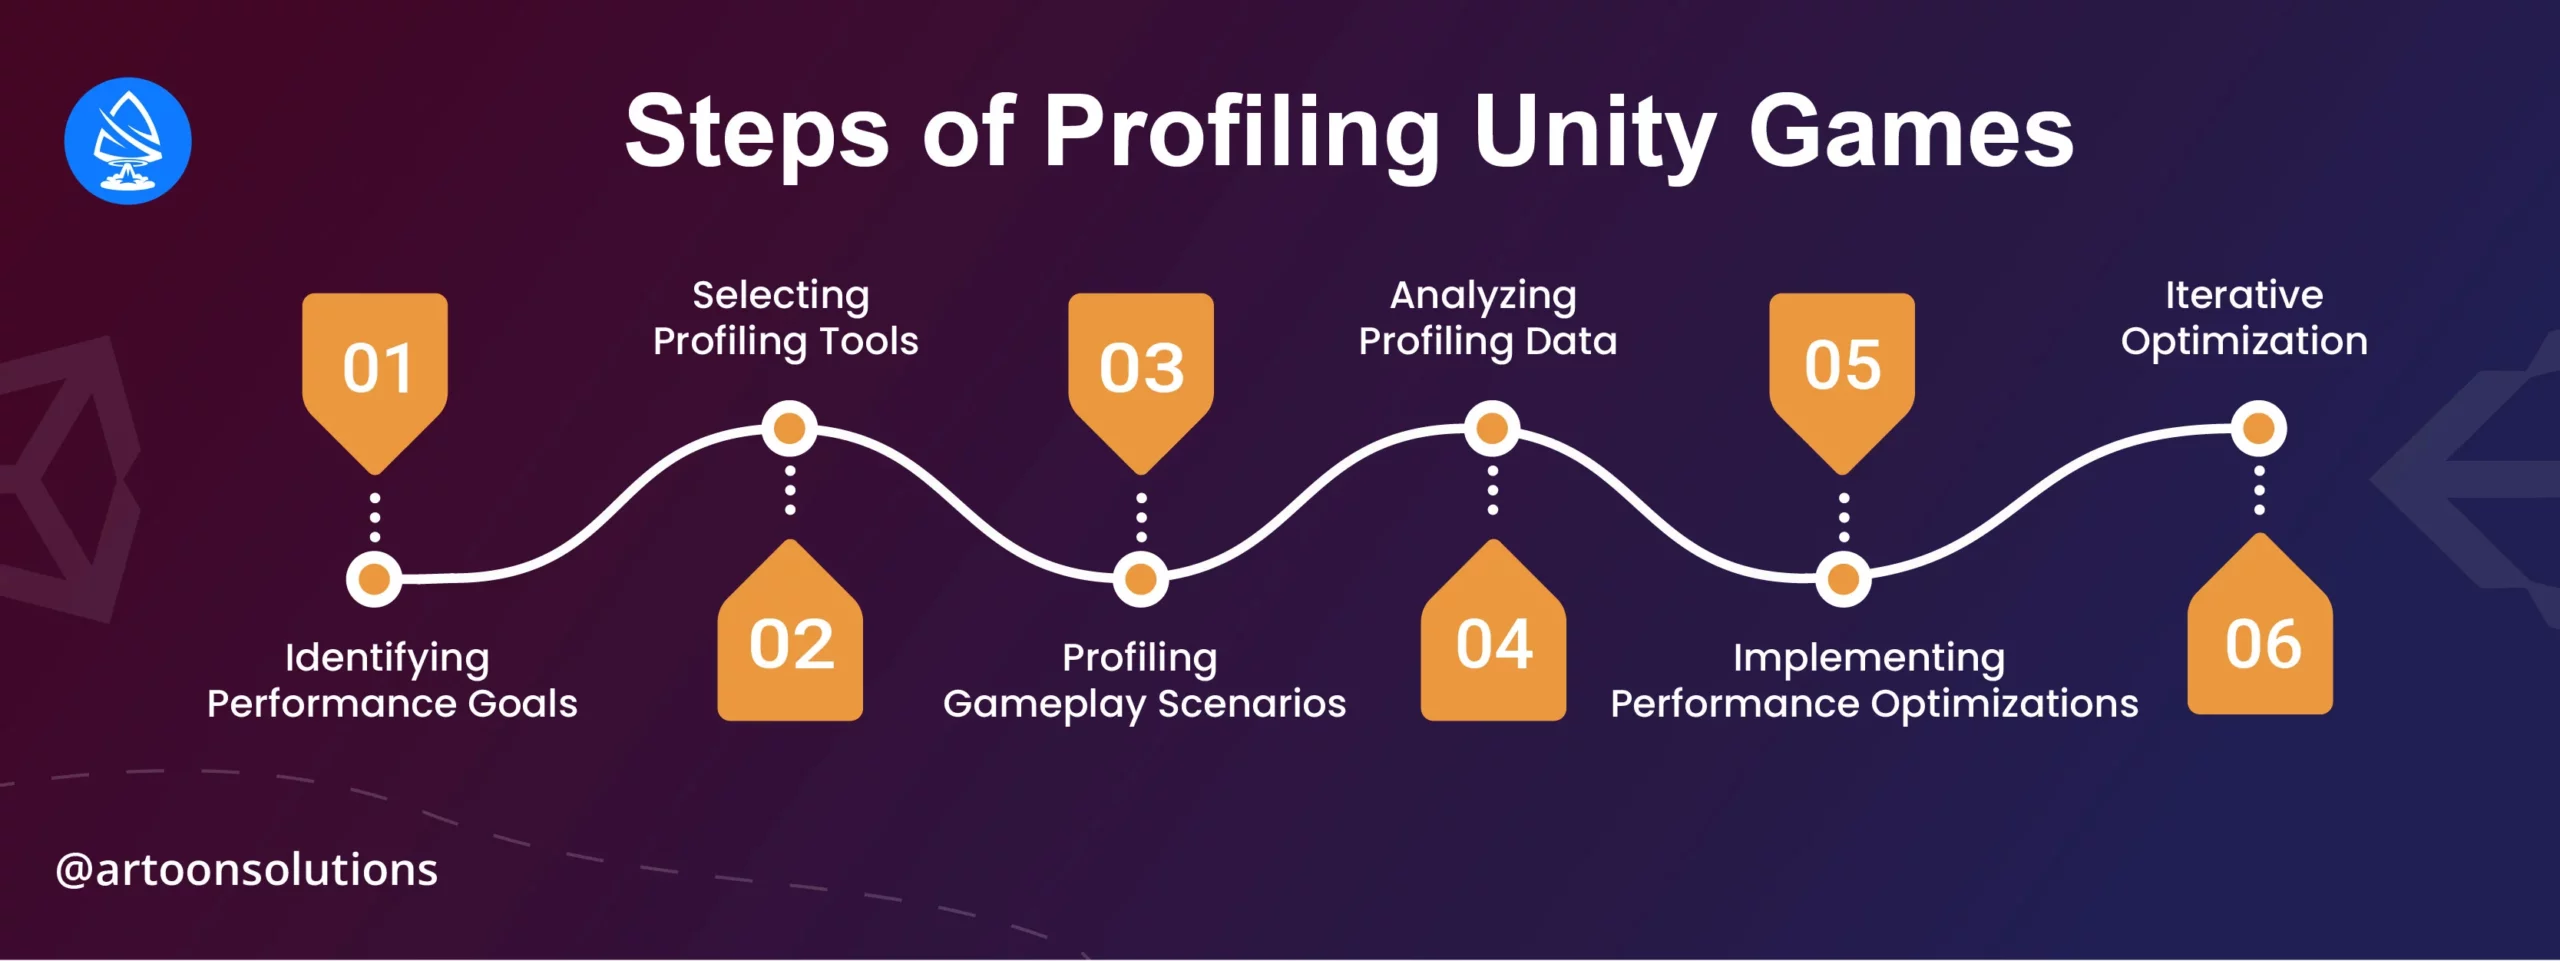 Steps of Profiling Unity Games